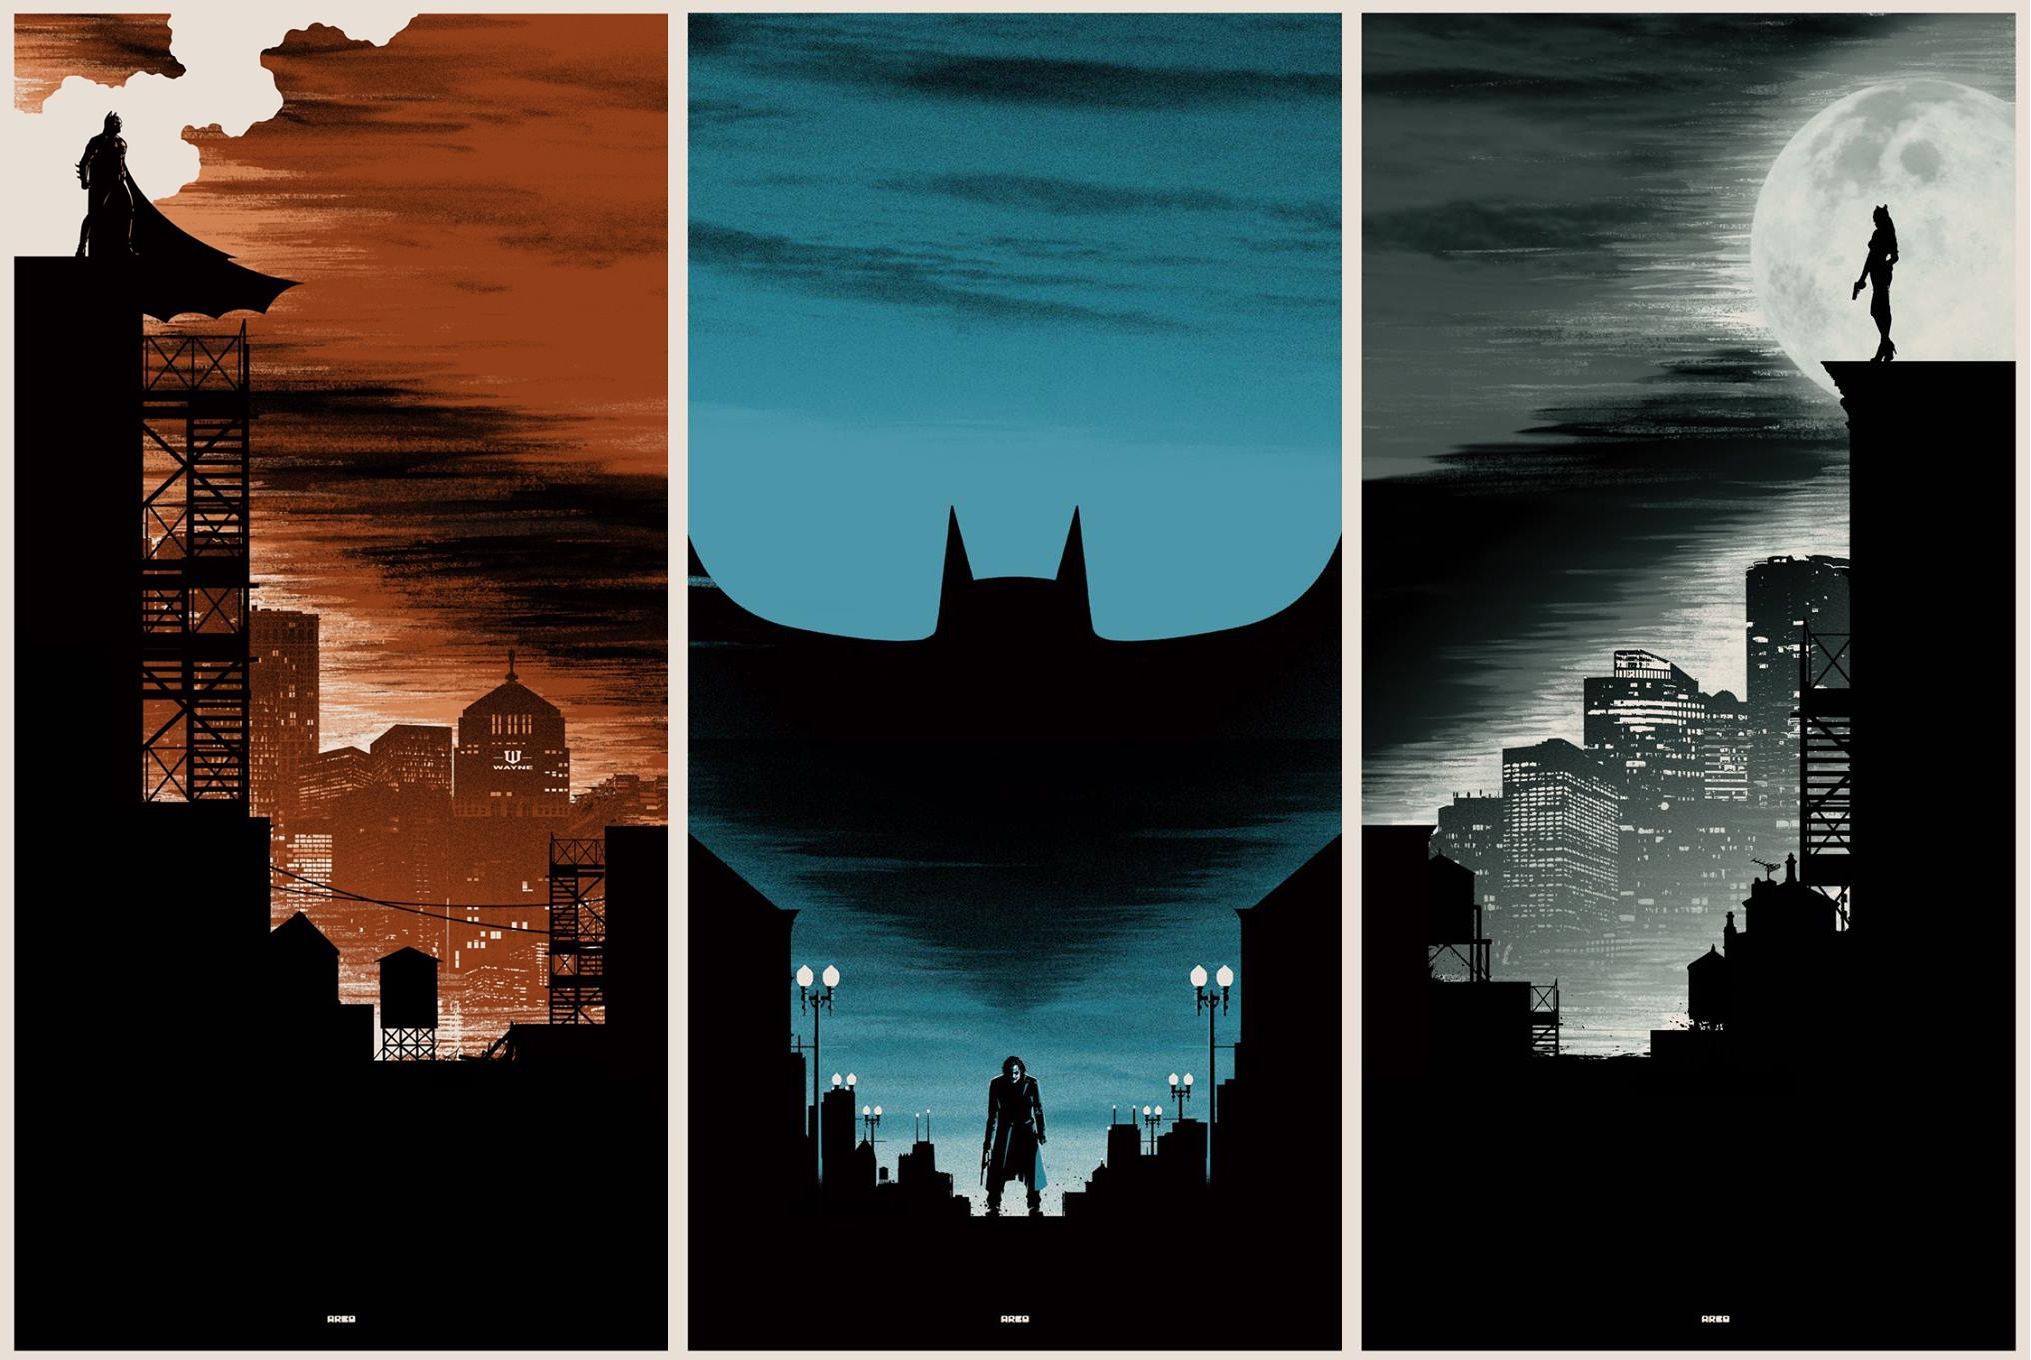 Matt Ferguson's Dark Knight Trilogy Wallpaper [previously Posted, But Now Uploaded In Hi Res]